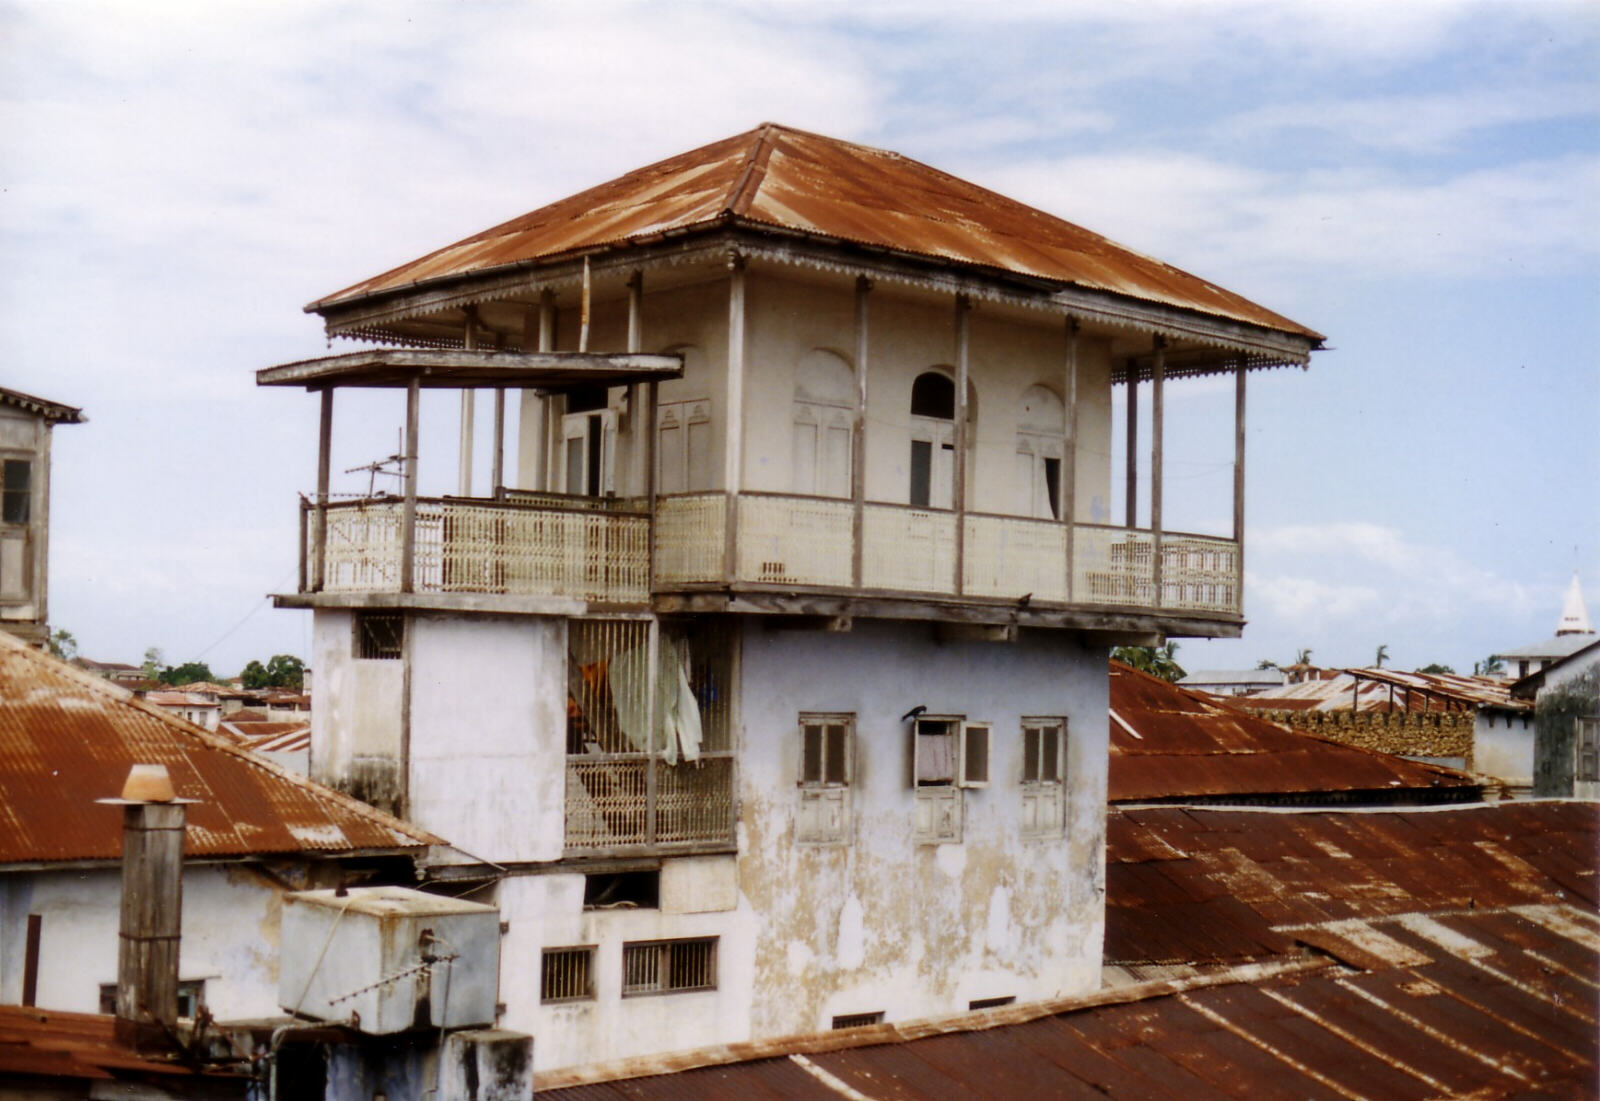 Rooftops of the old town in Zanzibar